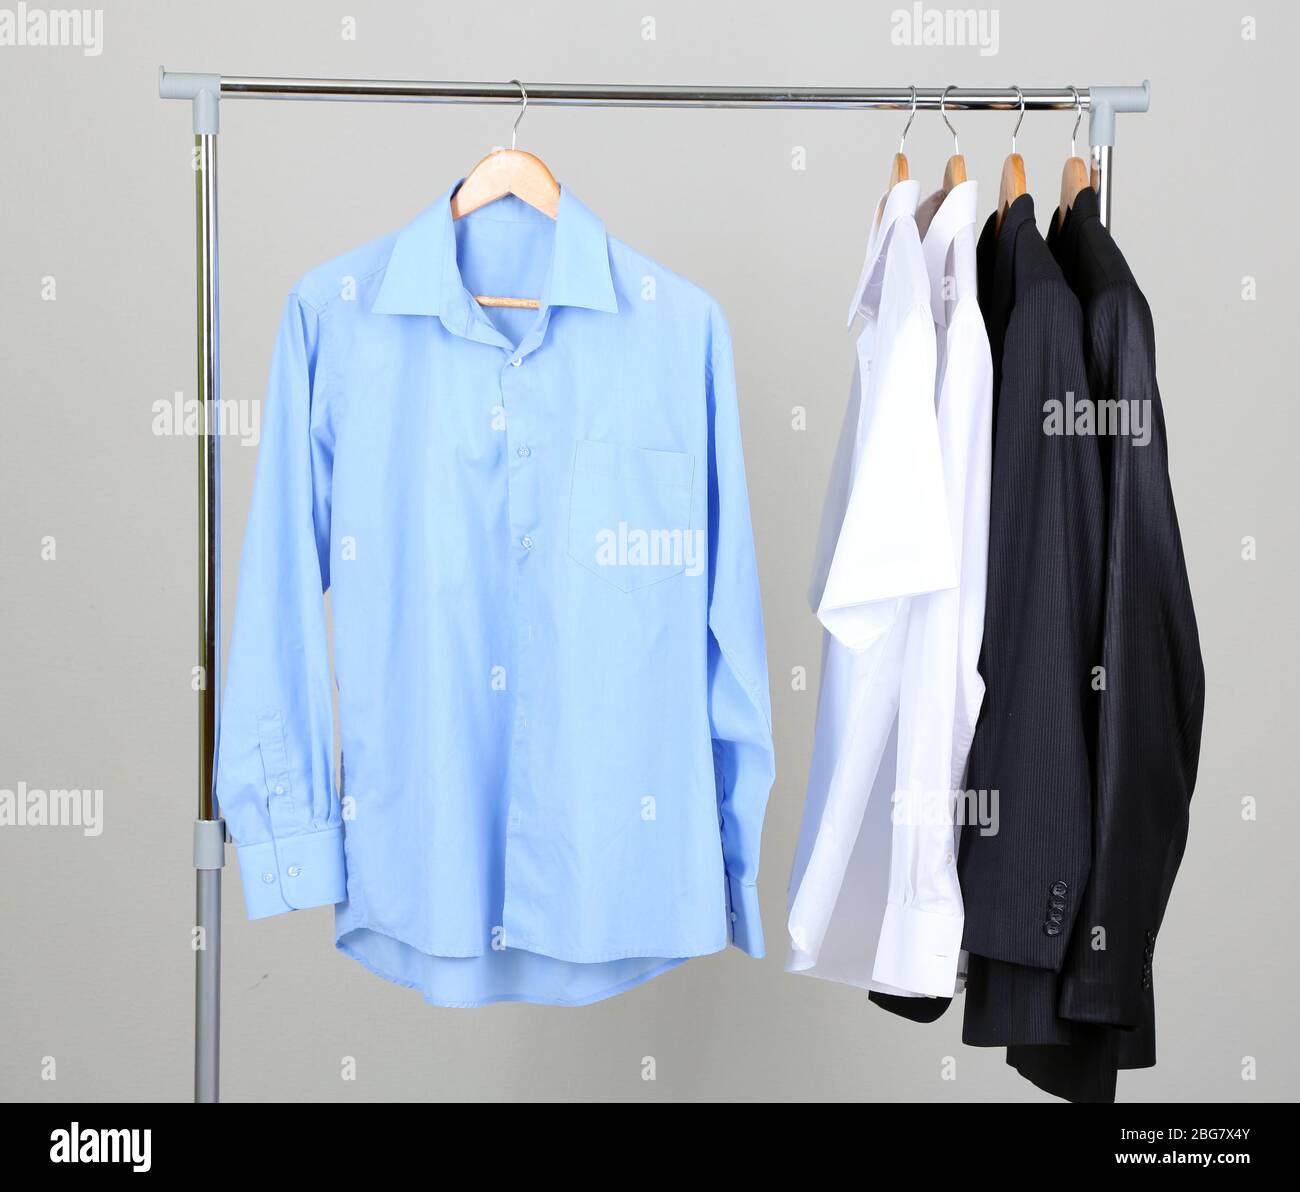 3,920 Mens Shirts On Hangers Images, Stock Photos, 3D objects, & Vectors